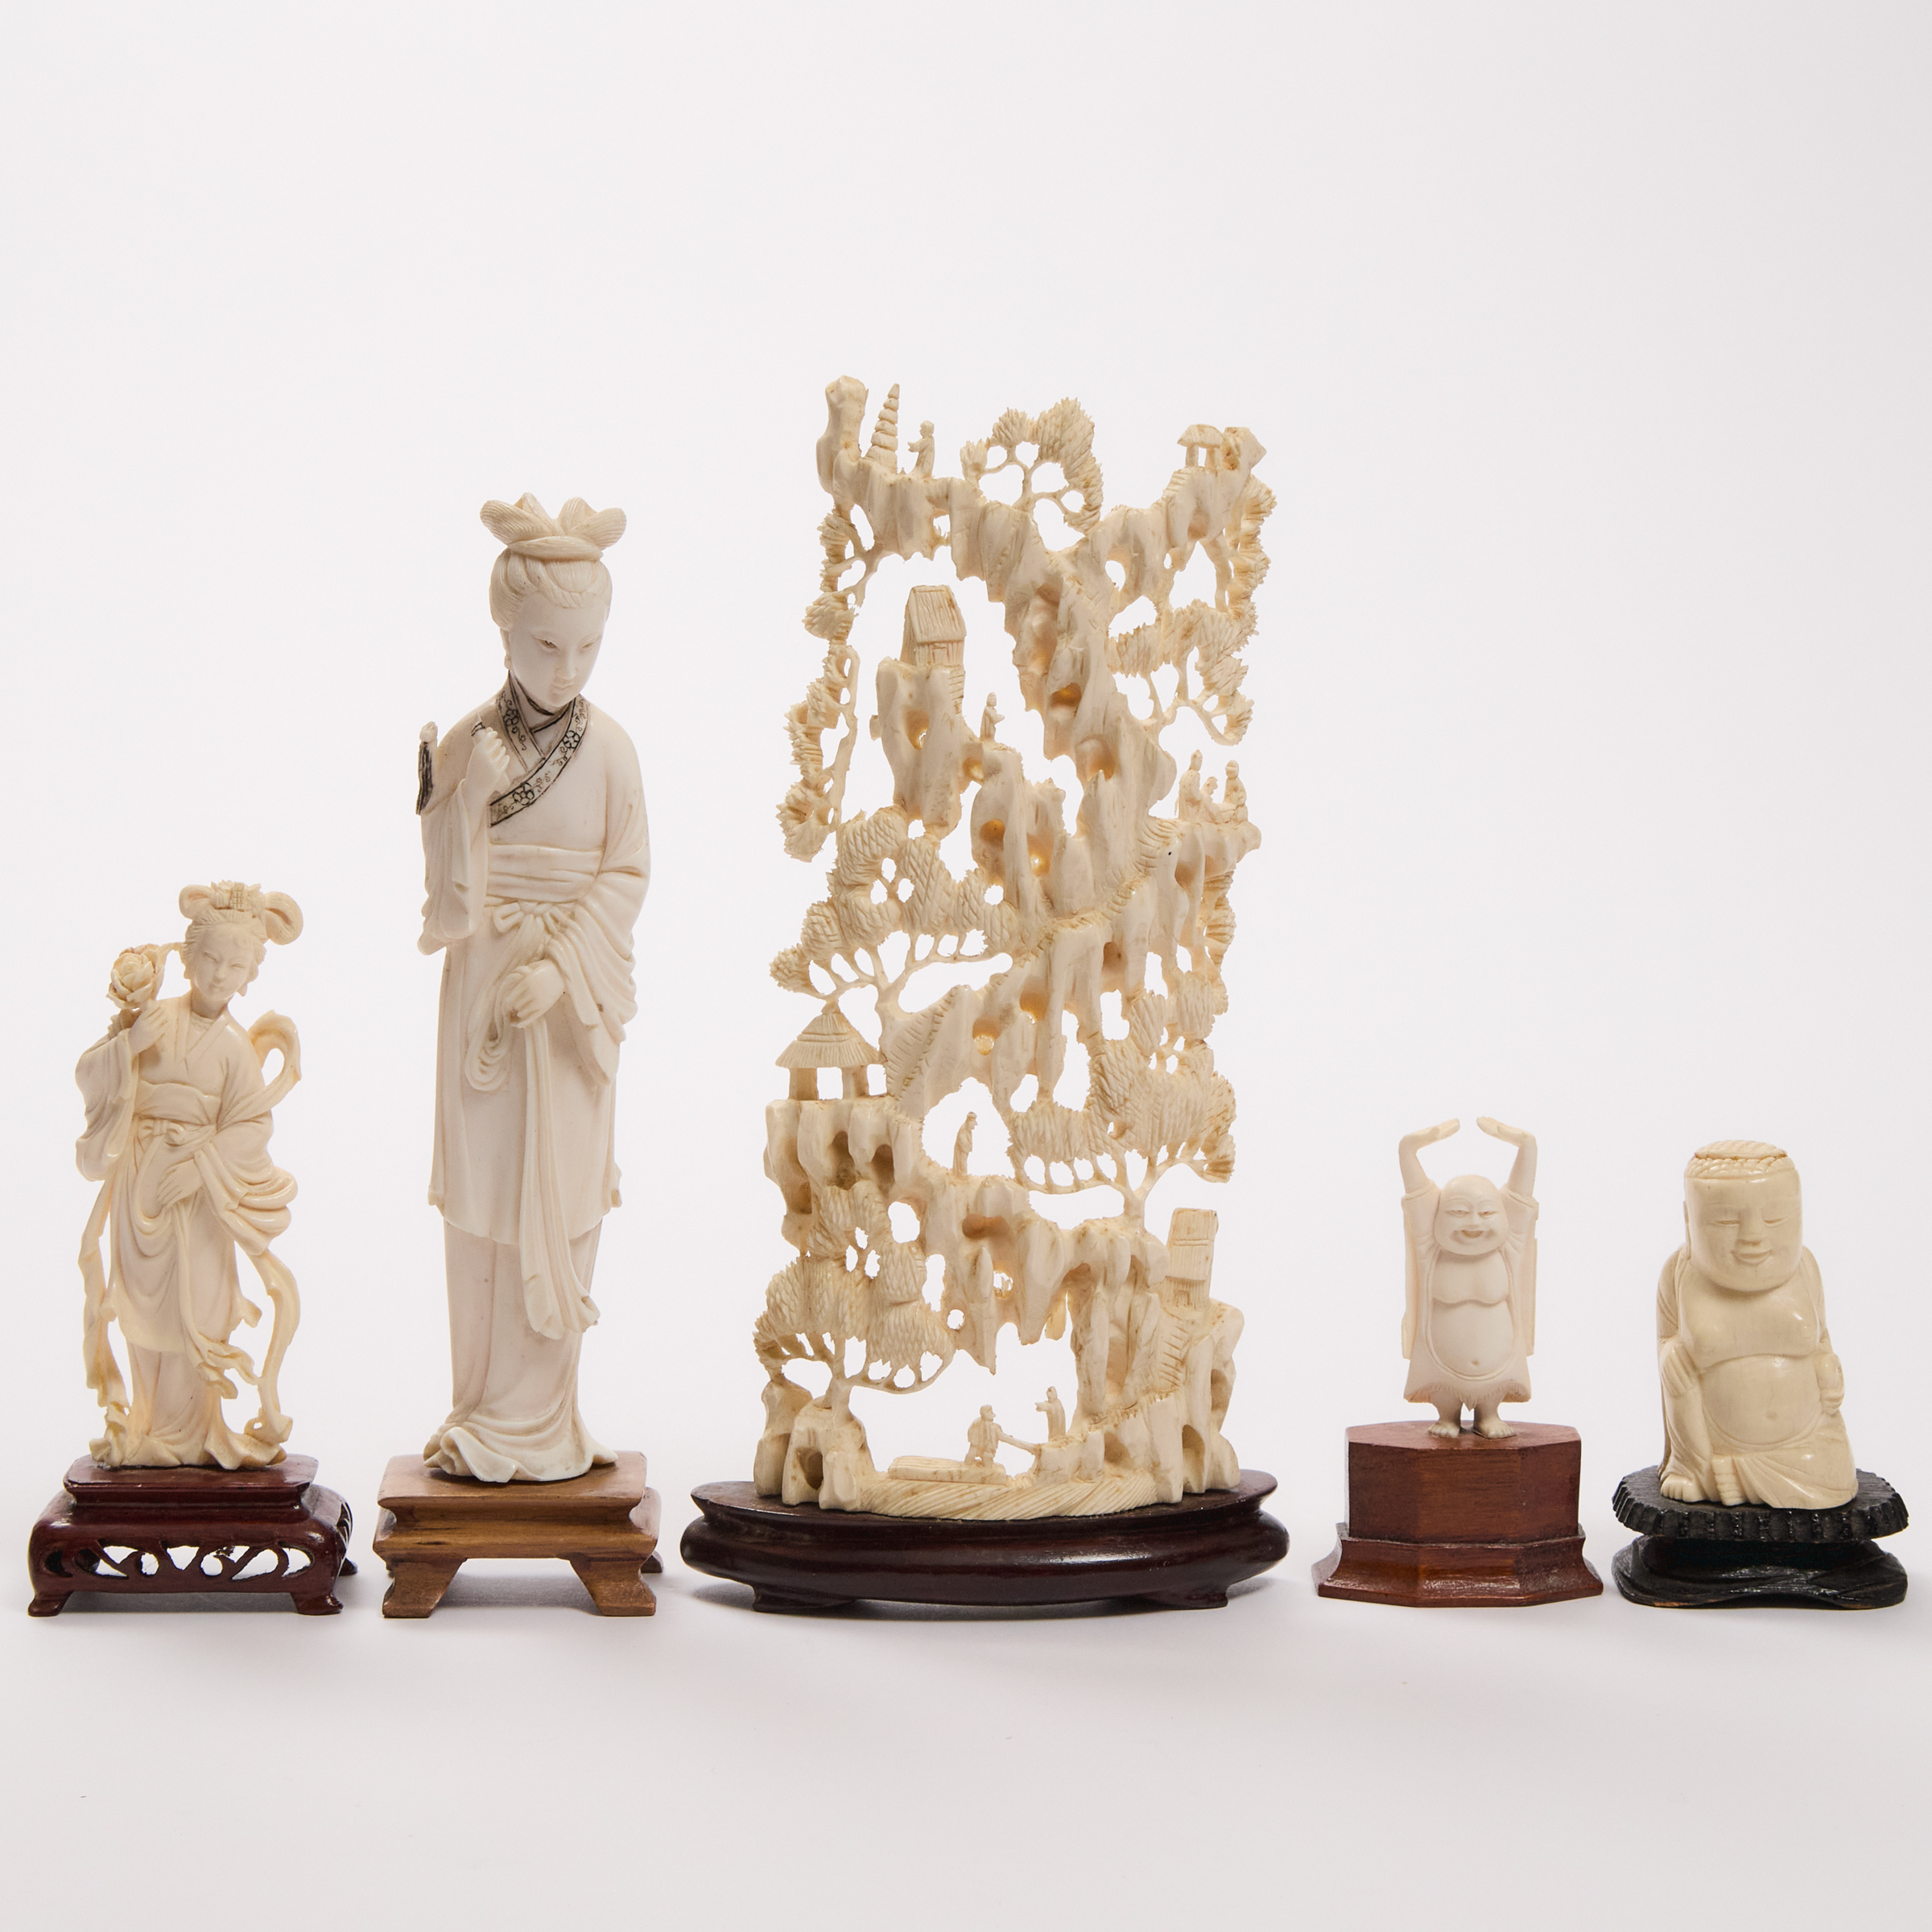 A Group of Five Chinese Ivory Carvings  2fb06a4